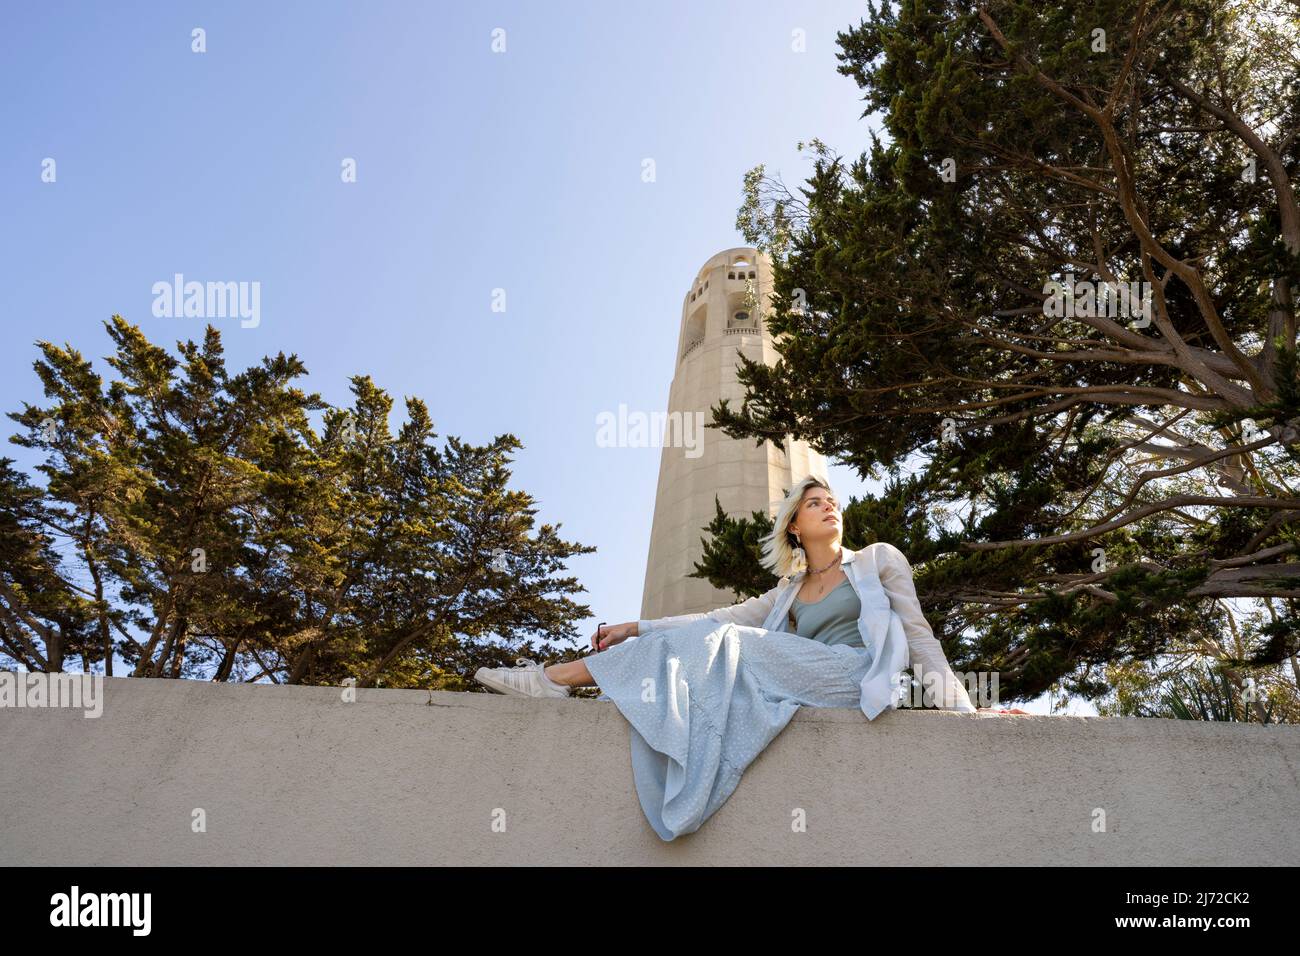 Young Woman Visiting Coit Tower in San Francisco | Lifestyle Tourism Stock Photo